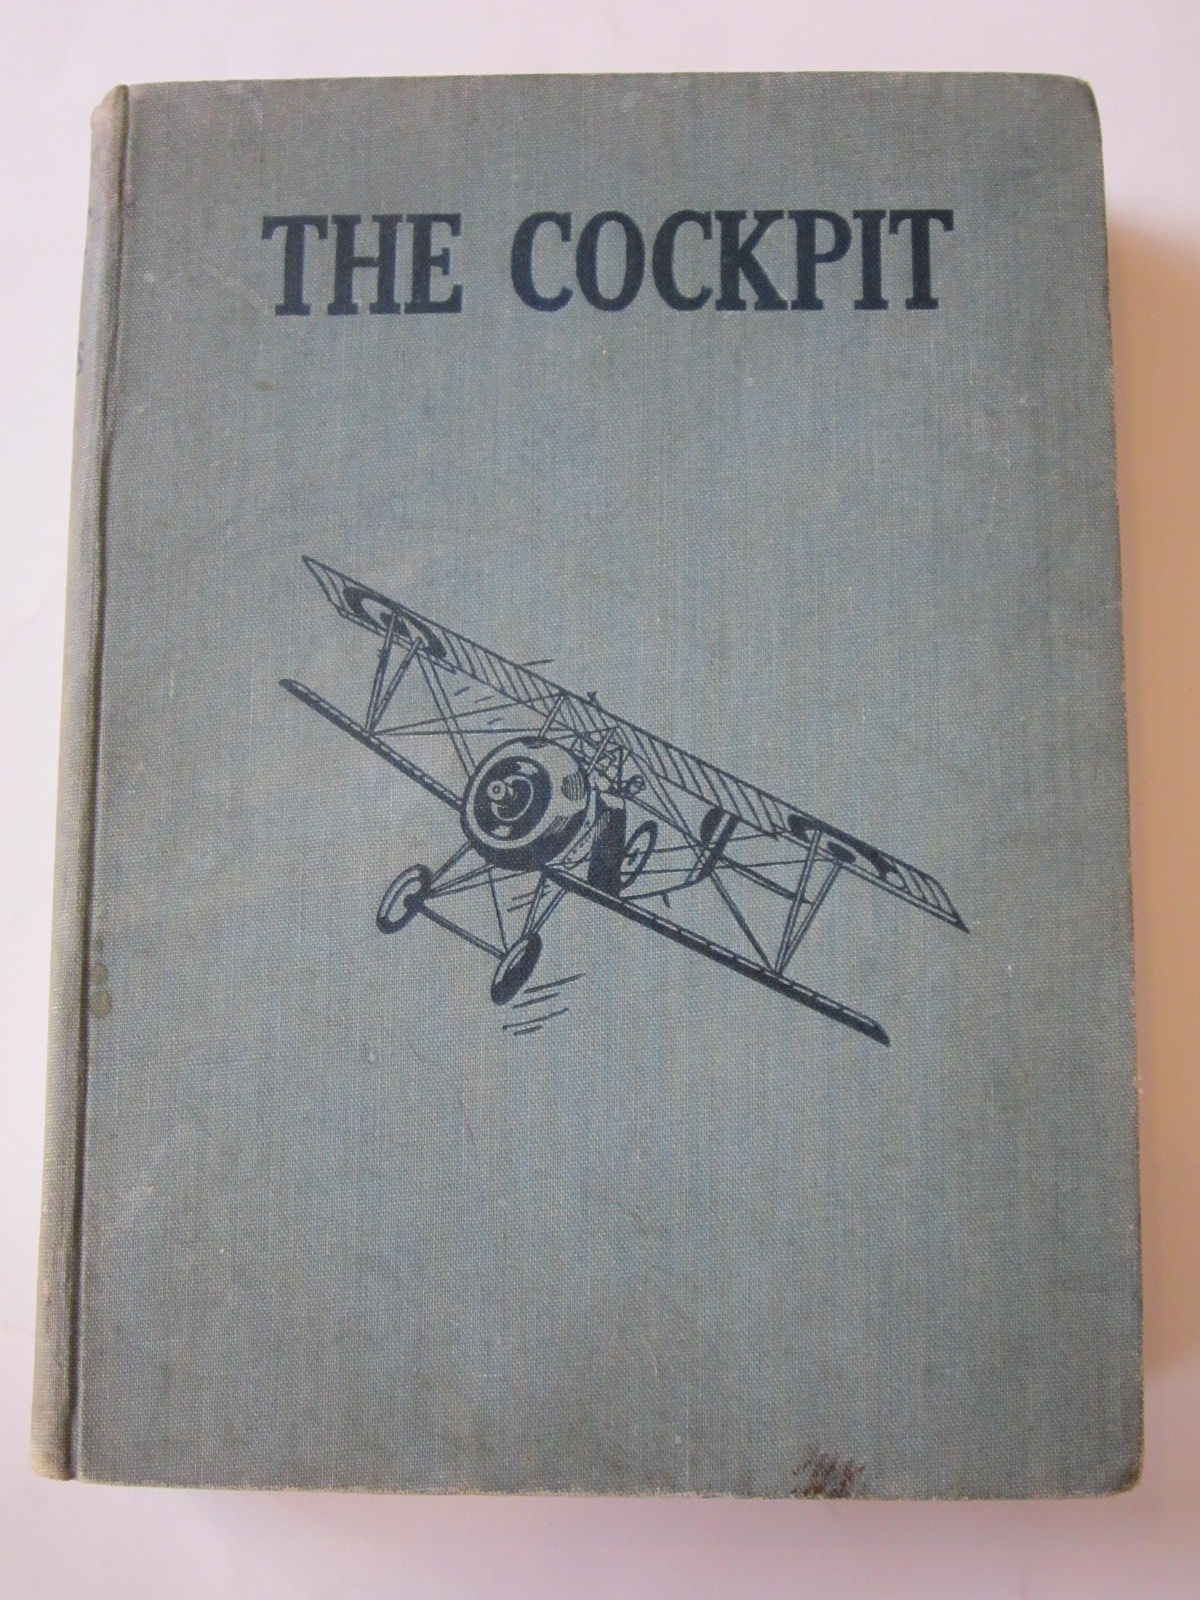 Photo of THE COCKPIT FLYING ADVENTURES FOR YOUNG PILOTS written by Johns, W.E. Whitehouse, Arch Stark, Rudolf et al,  illustrated by Bradshaw, Stanley Orton Leigh, Howard published by John Hamilton Ltd. (STOCK CODE: 1308325)  for sale by Stella & Rose's Books